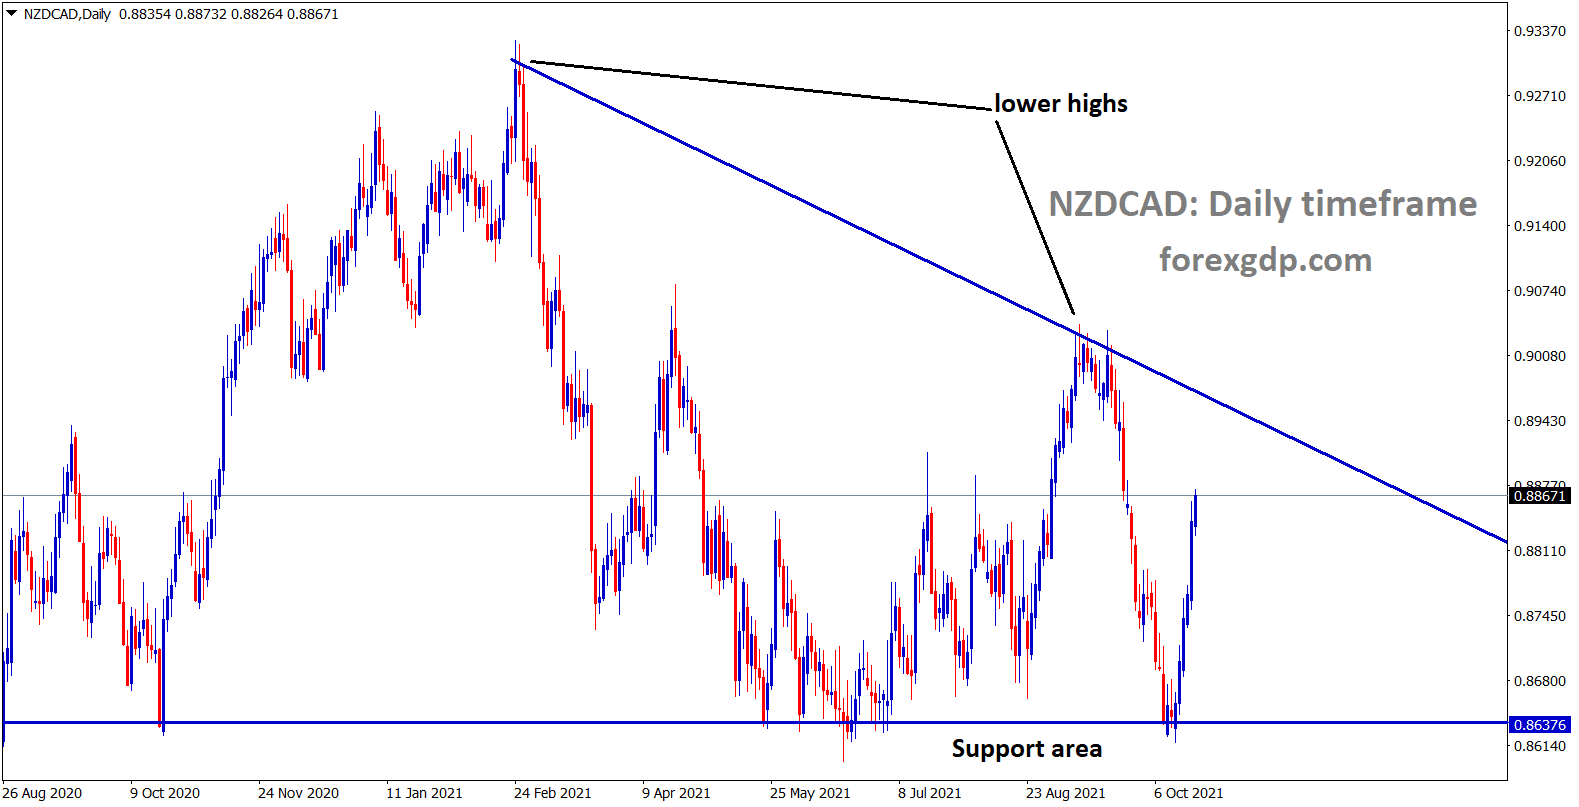 NZDCAD is moving in a descending triangle pattern